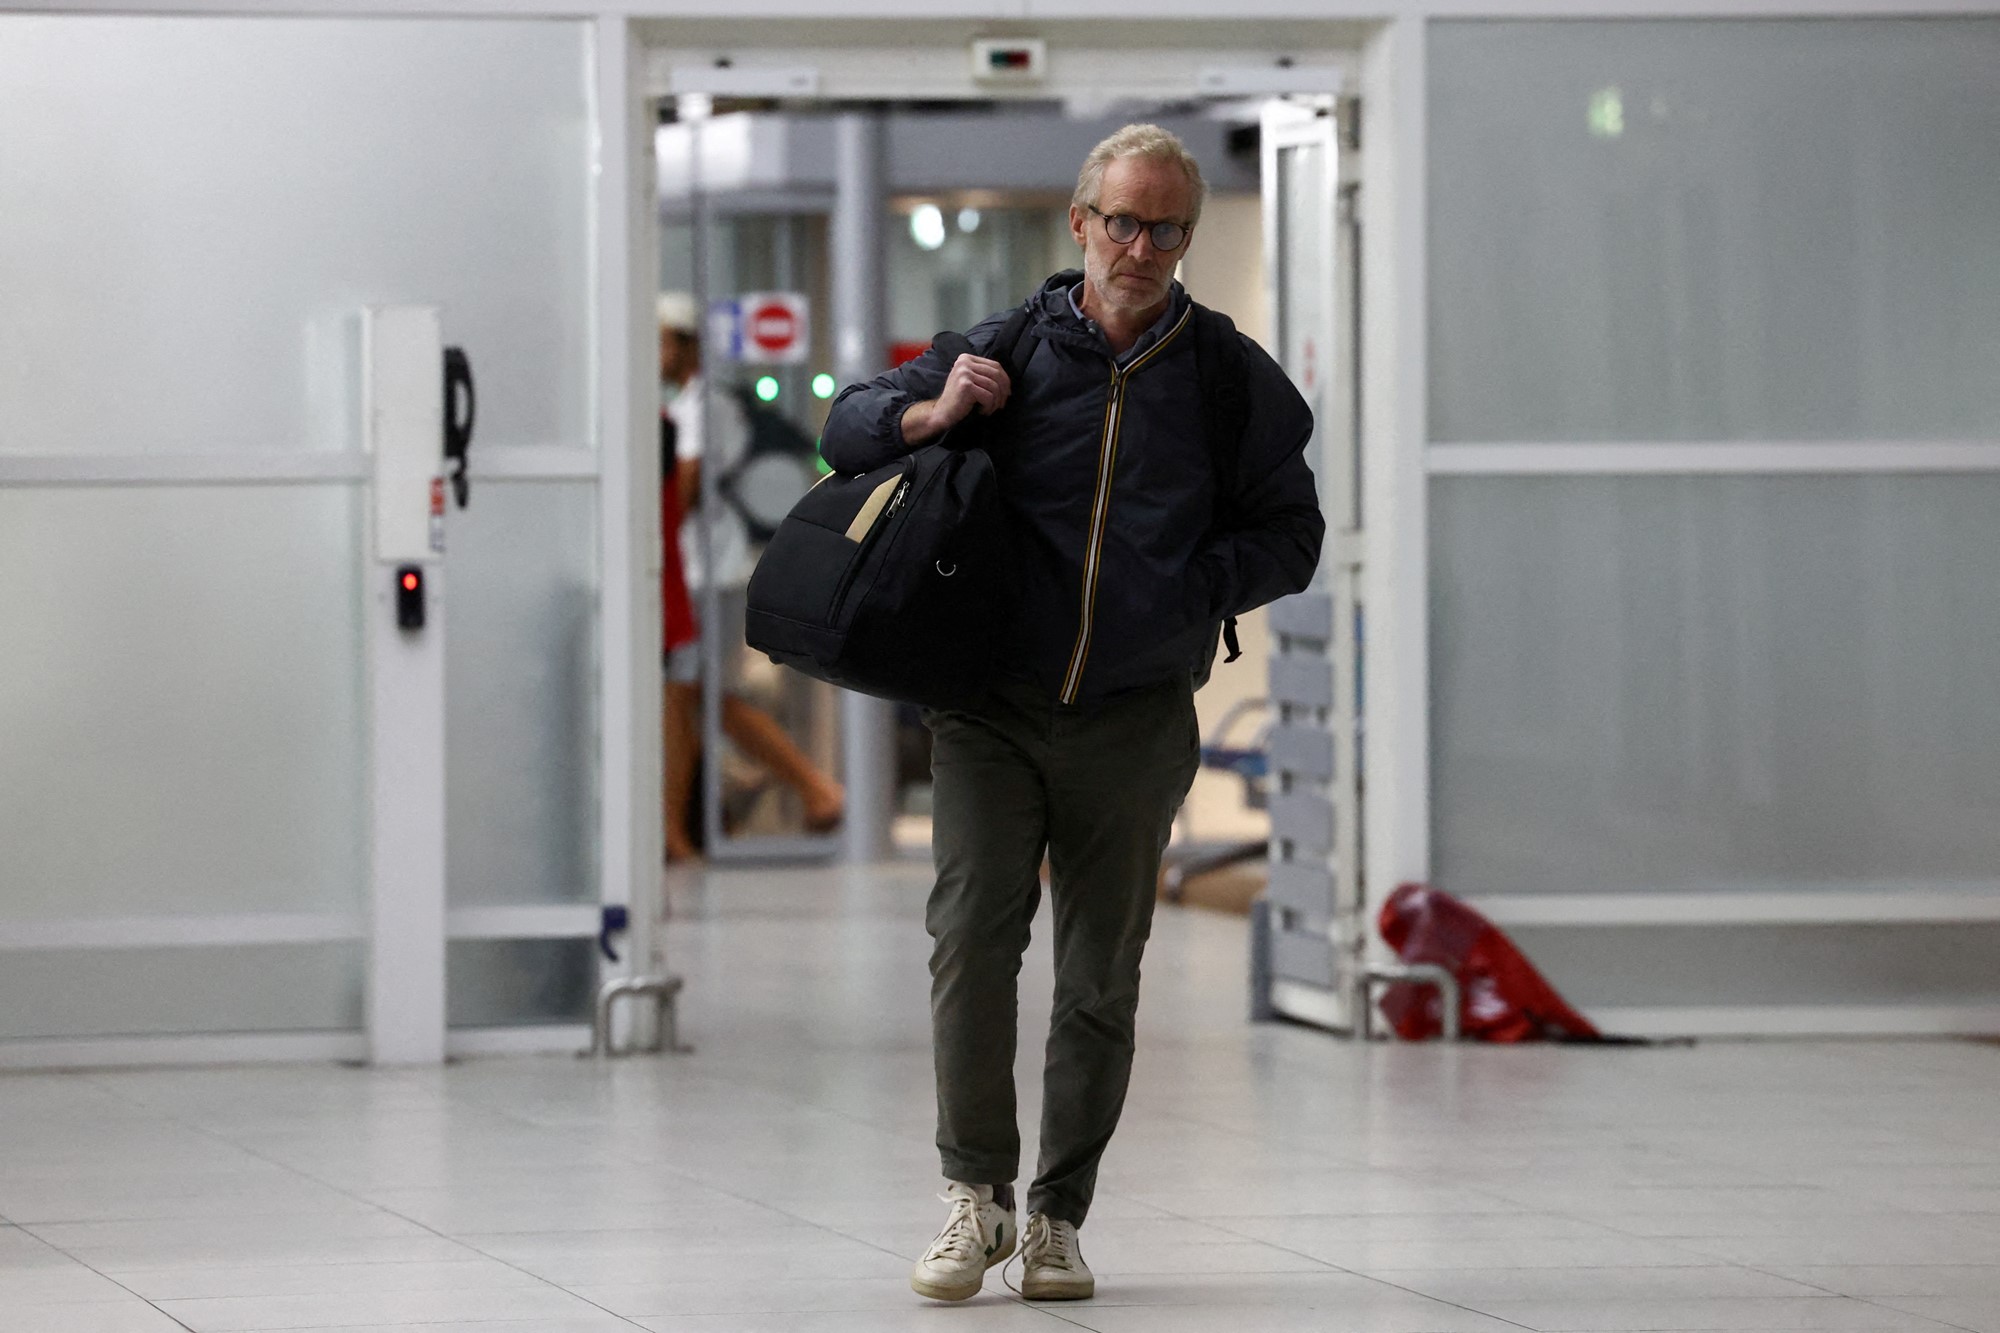 A man with grey hair, glasses, and a bag walks thorugh the arrivals gate